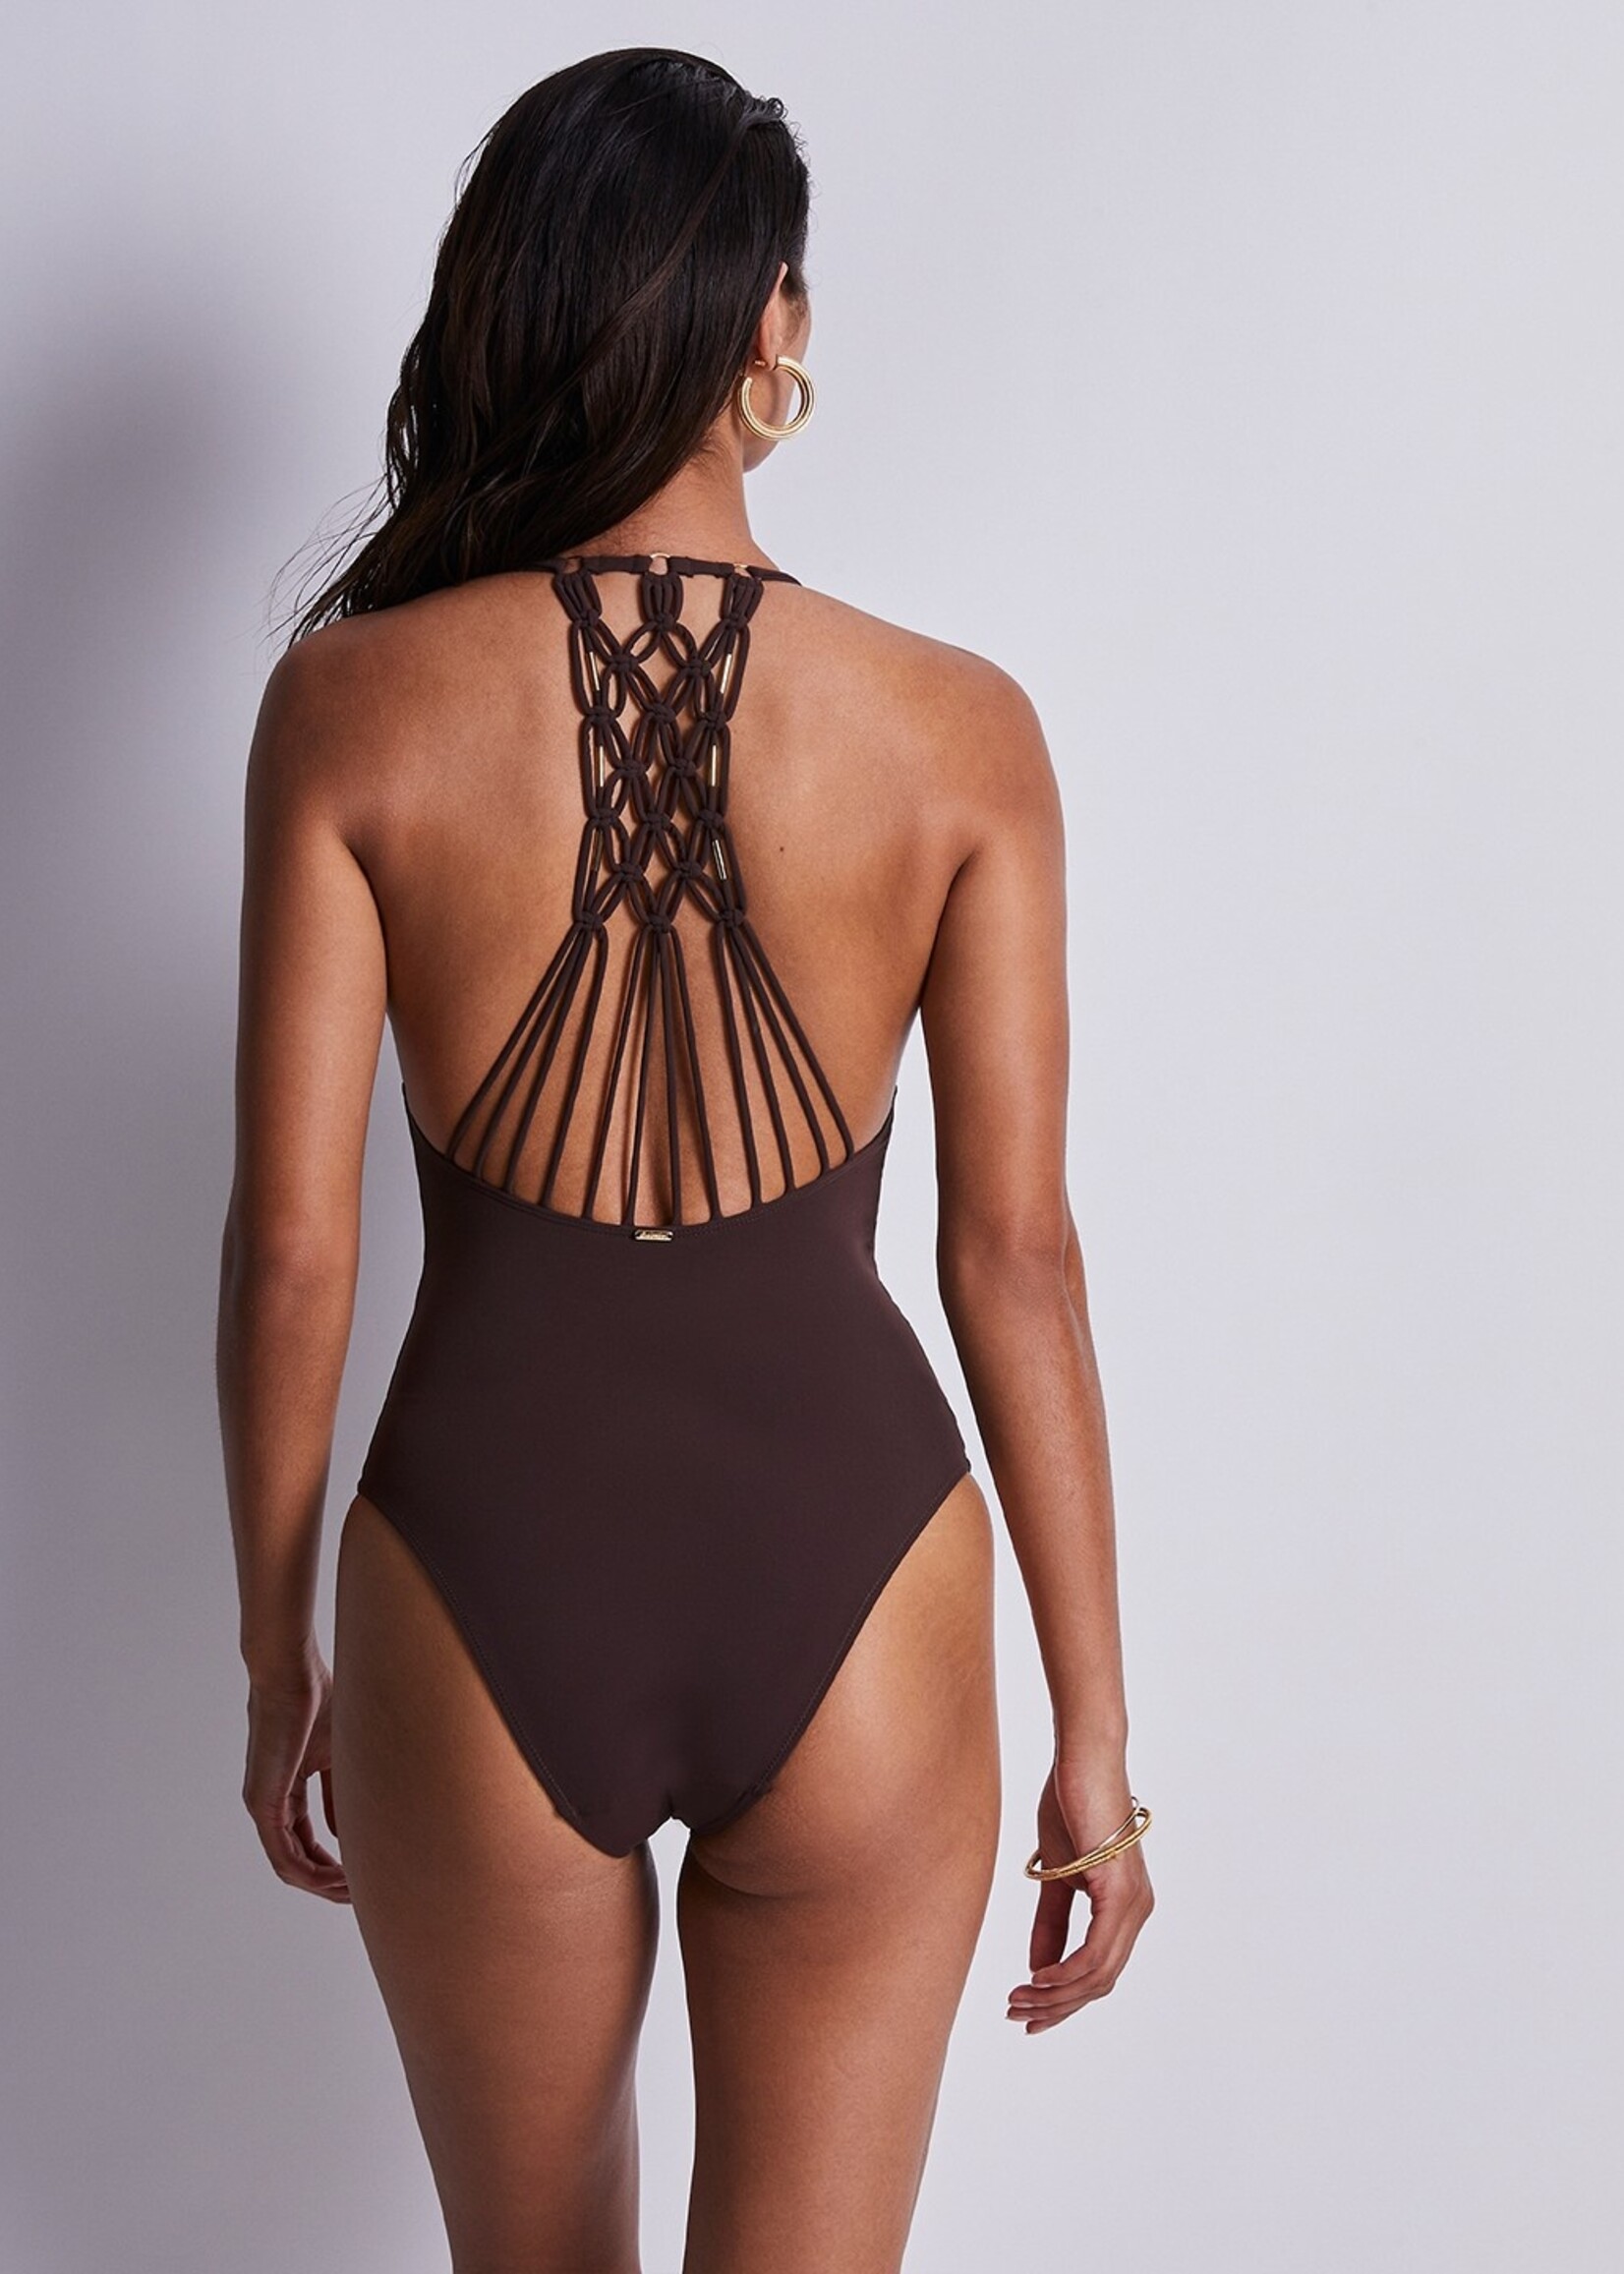 Aubade Gipsy Muse One Piece Swimsuit